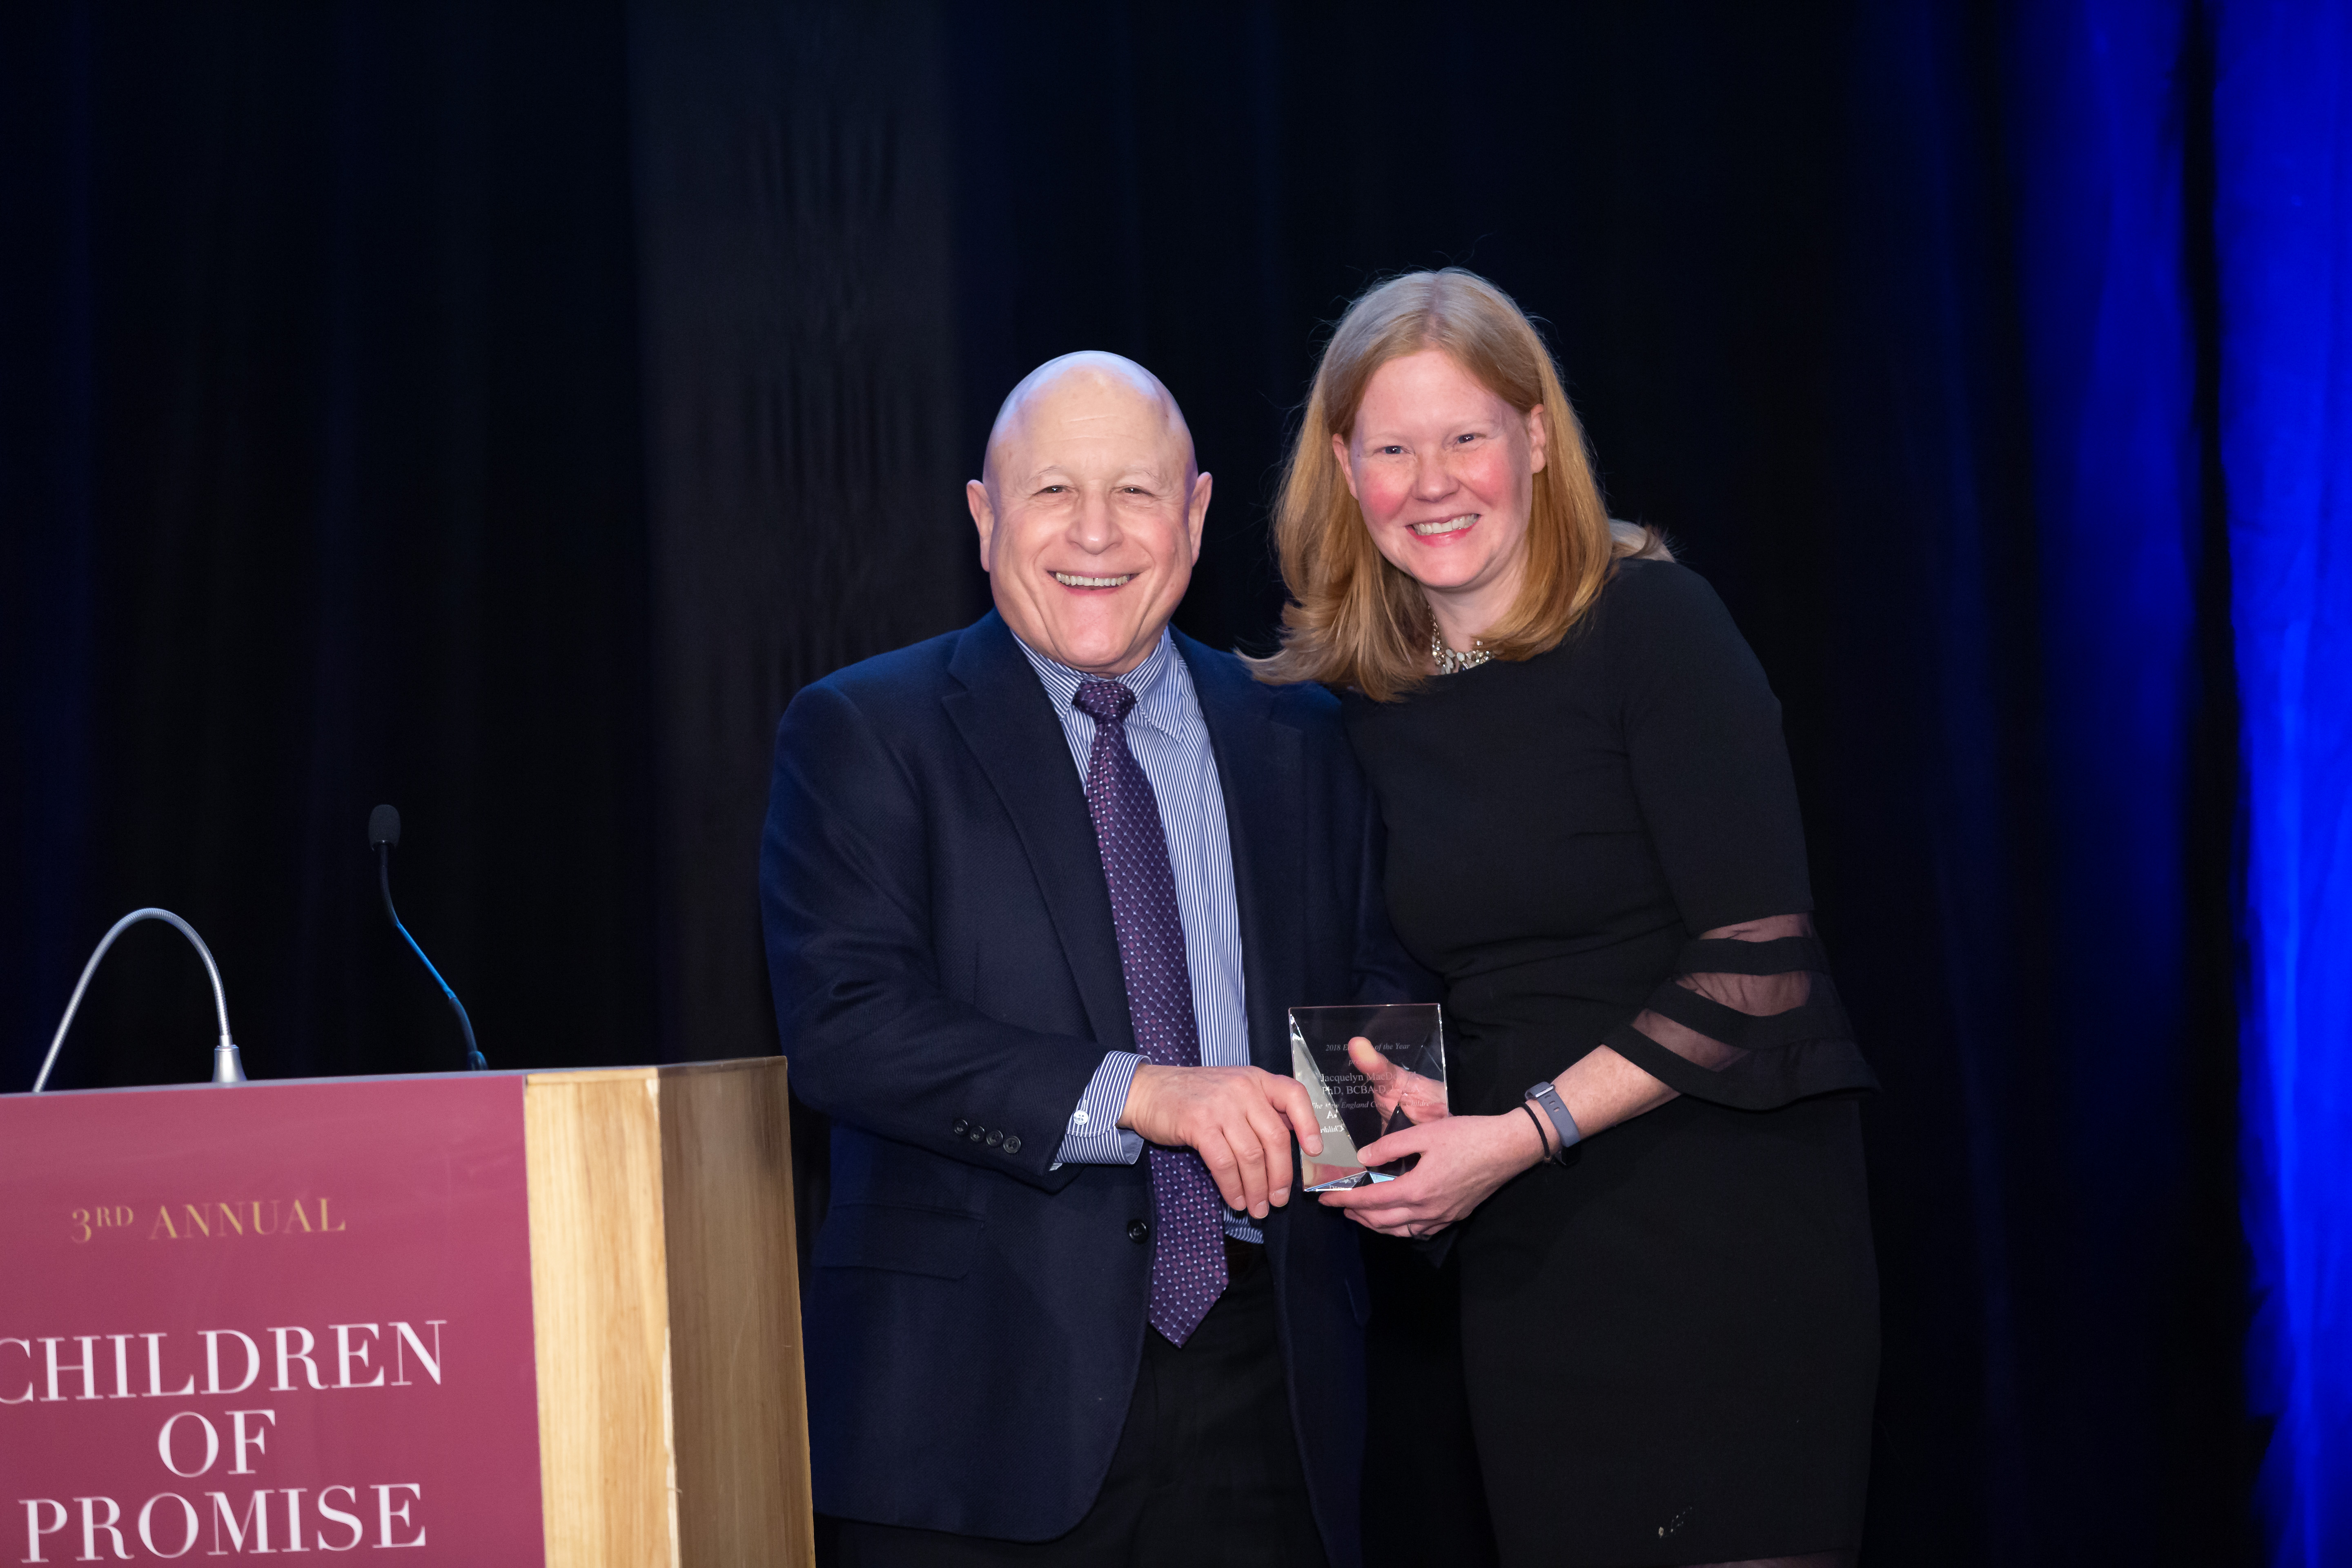 NECC President and CEO, Vinnie Strully, with Educator of the Year, Jacquelyn MacDonald, PhD, of Regis College